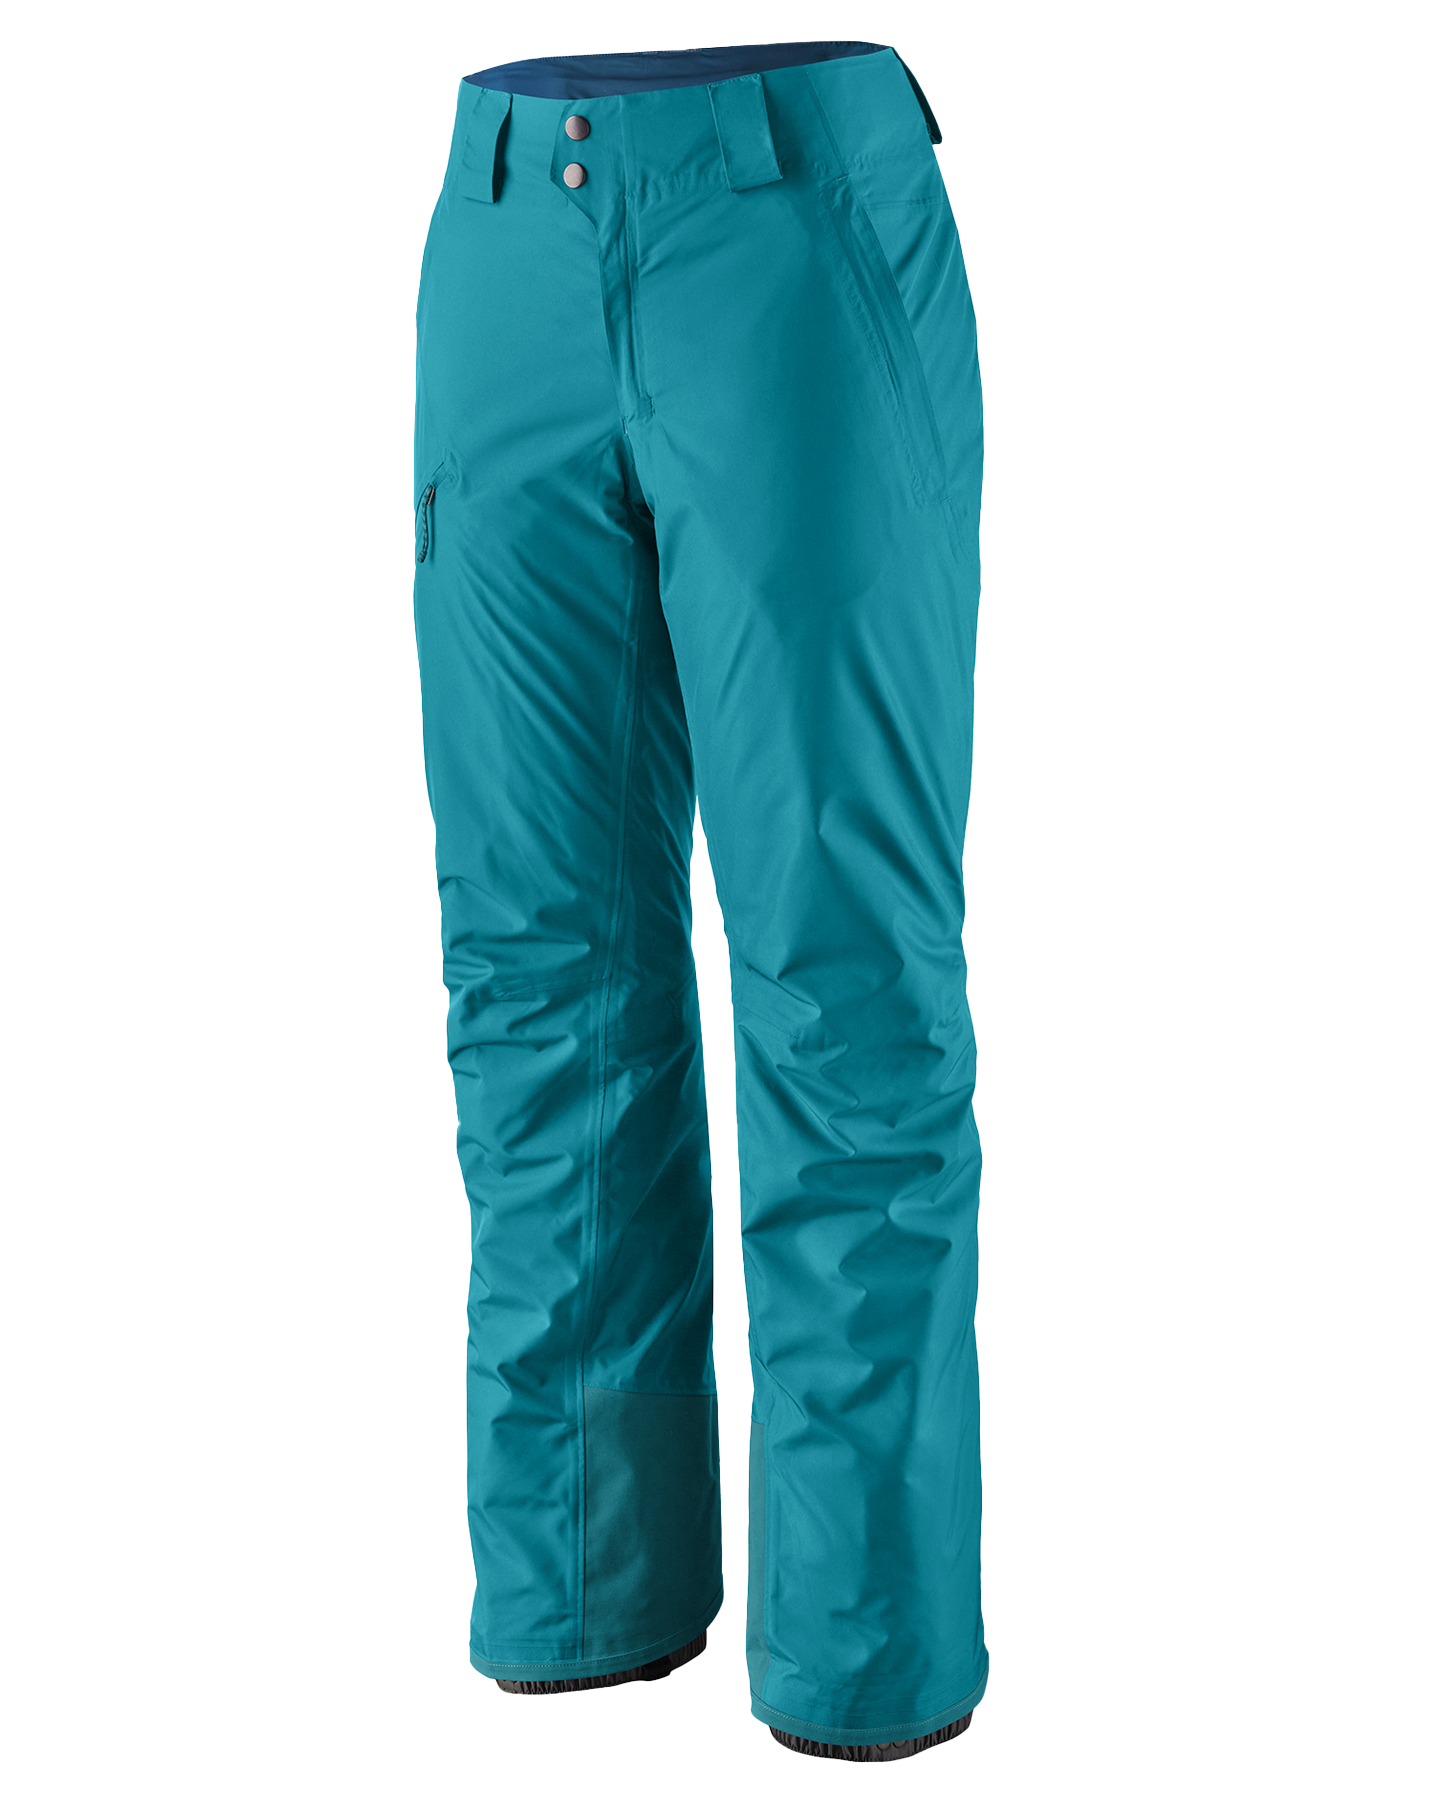 Patagonia Insulated Powder Town Women's Snow Pants - Belay Blue - 2024 Women's Snow Pants - SnowSkiersWarehouse